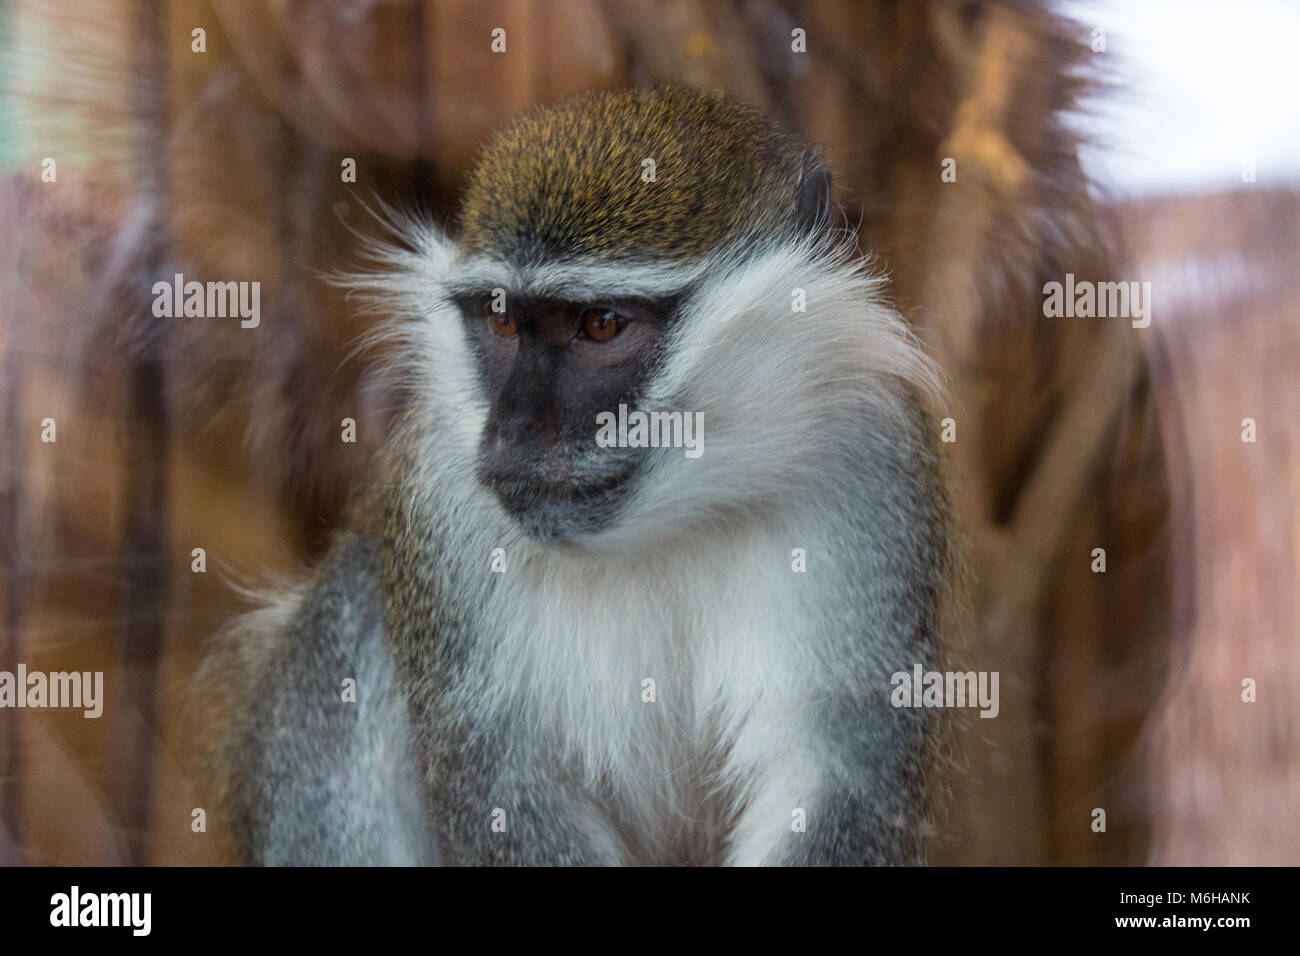 Magdeburg, Germany - 4 March 2018: A little monkey looks through the glass pane of his cage curiously at visitors to the Zoo Magdeburg, Germany. Stock Photo